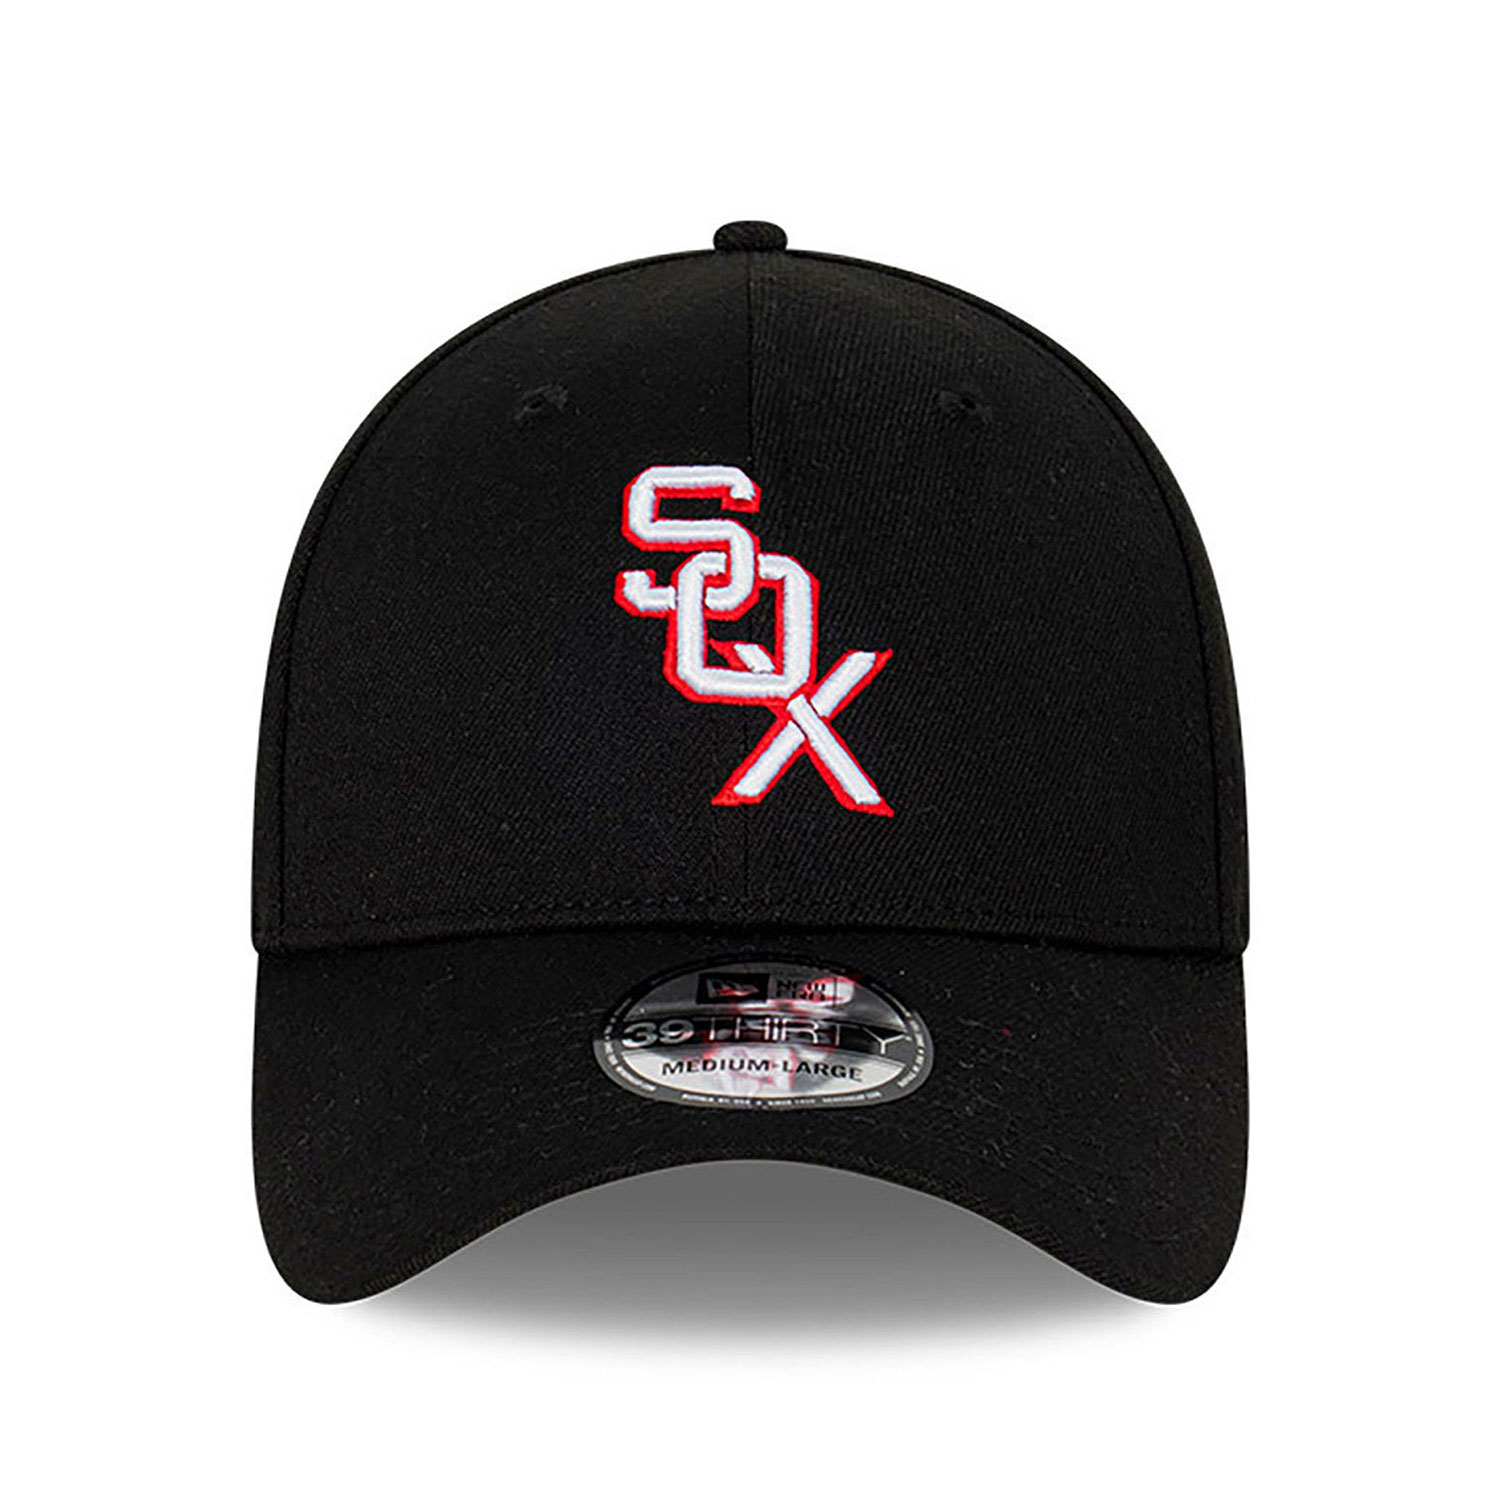 Chicago White Sox Cooperstown Black 39THIRTY Stretch Fit Cap